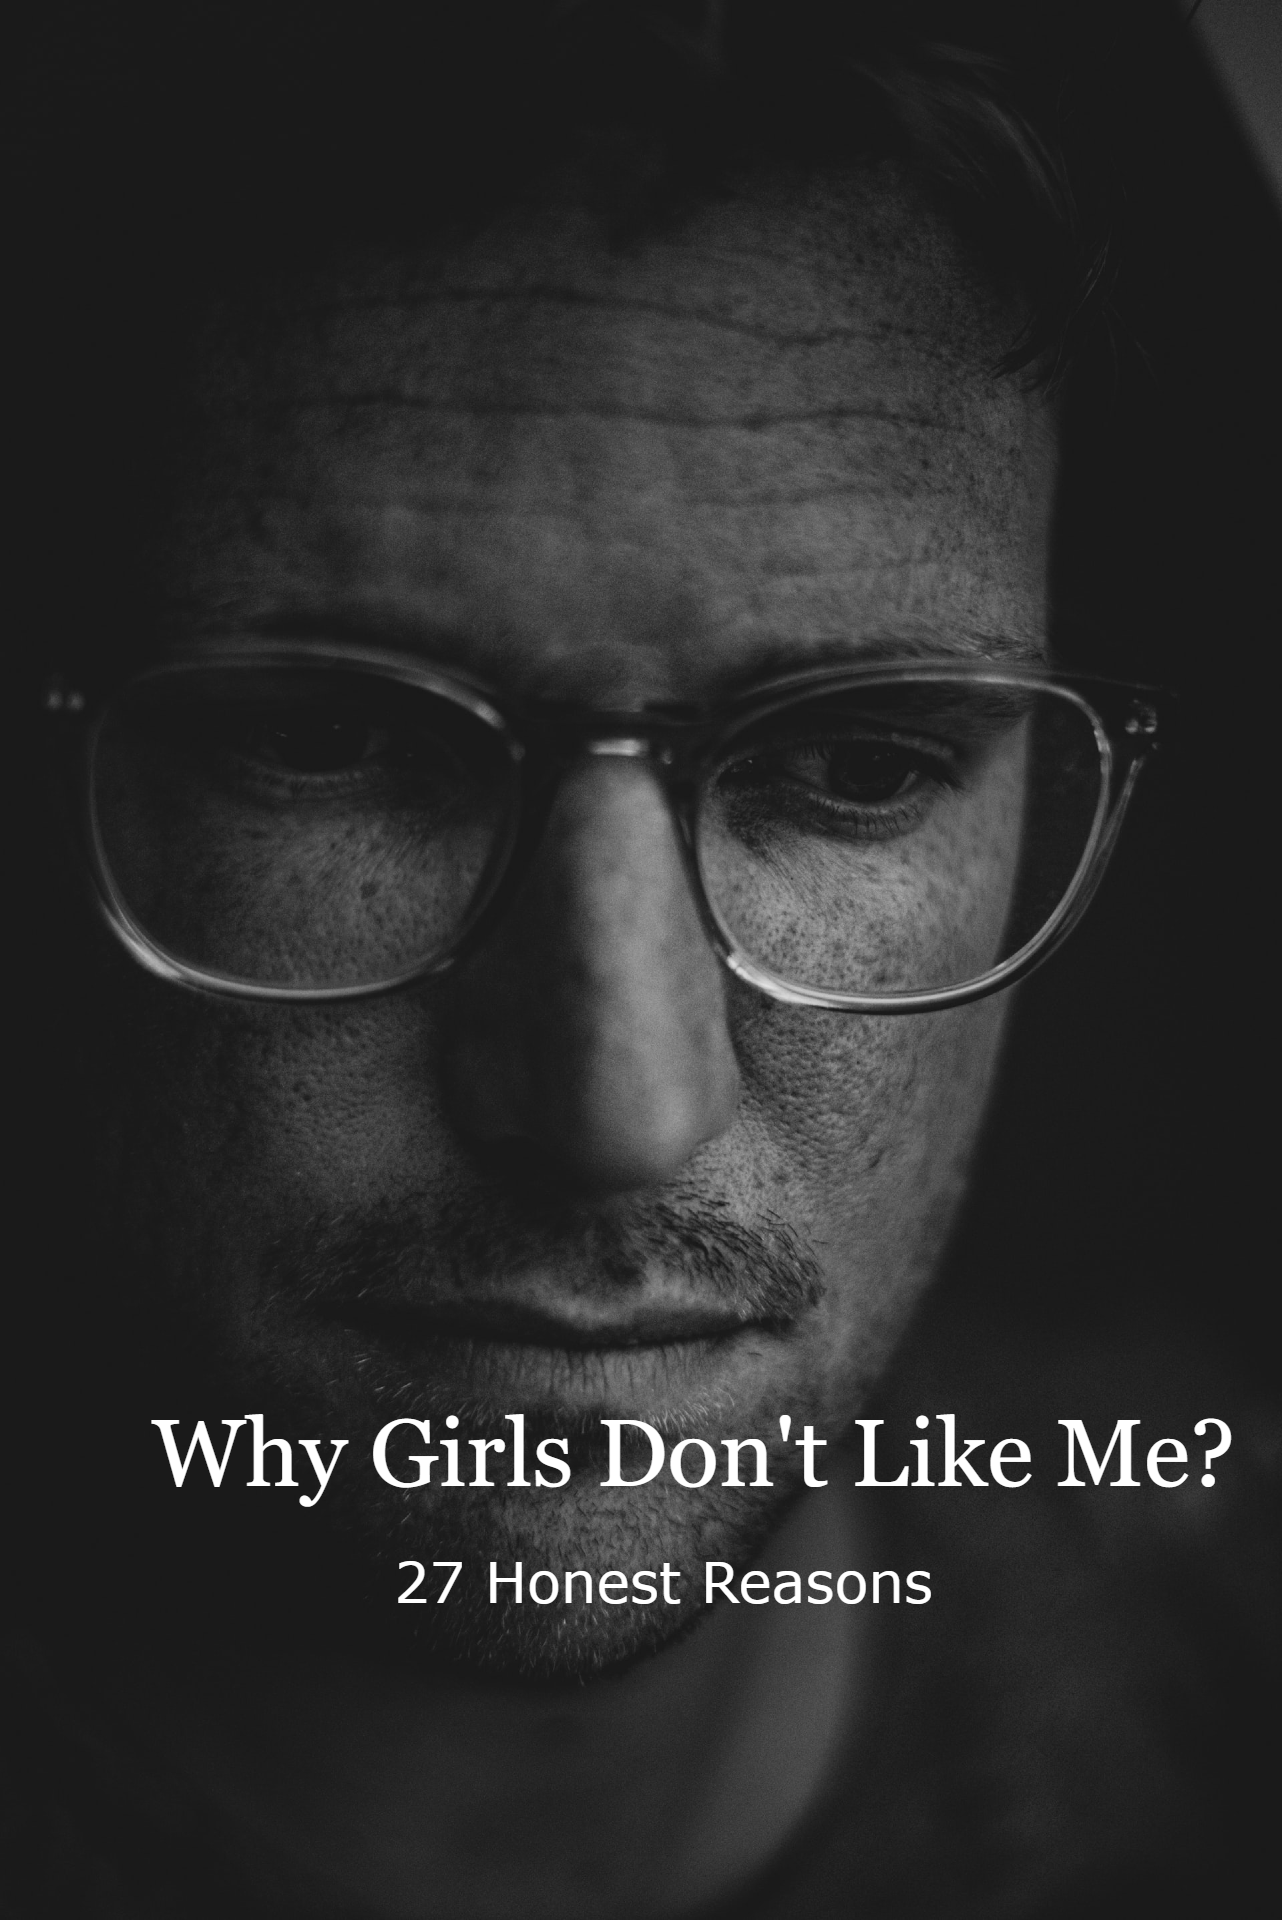 Why girls don't like me